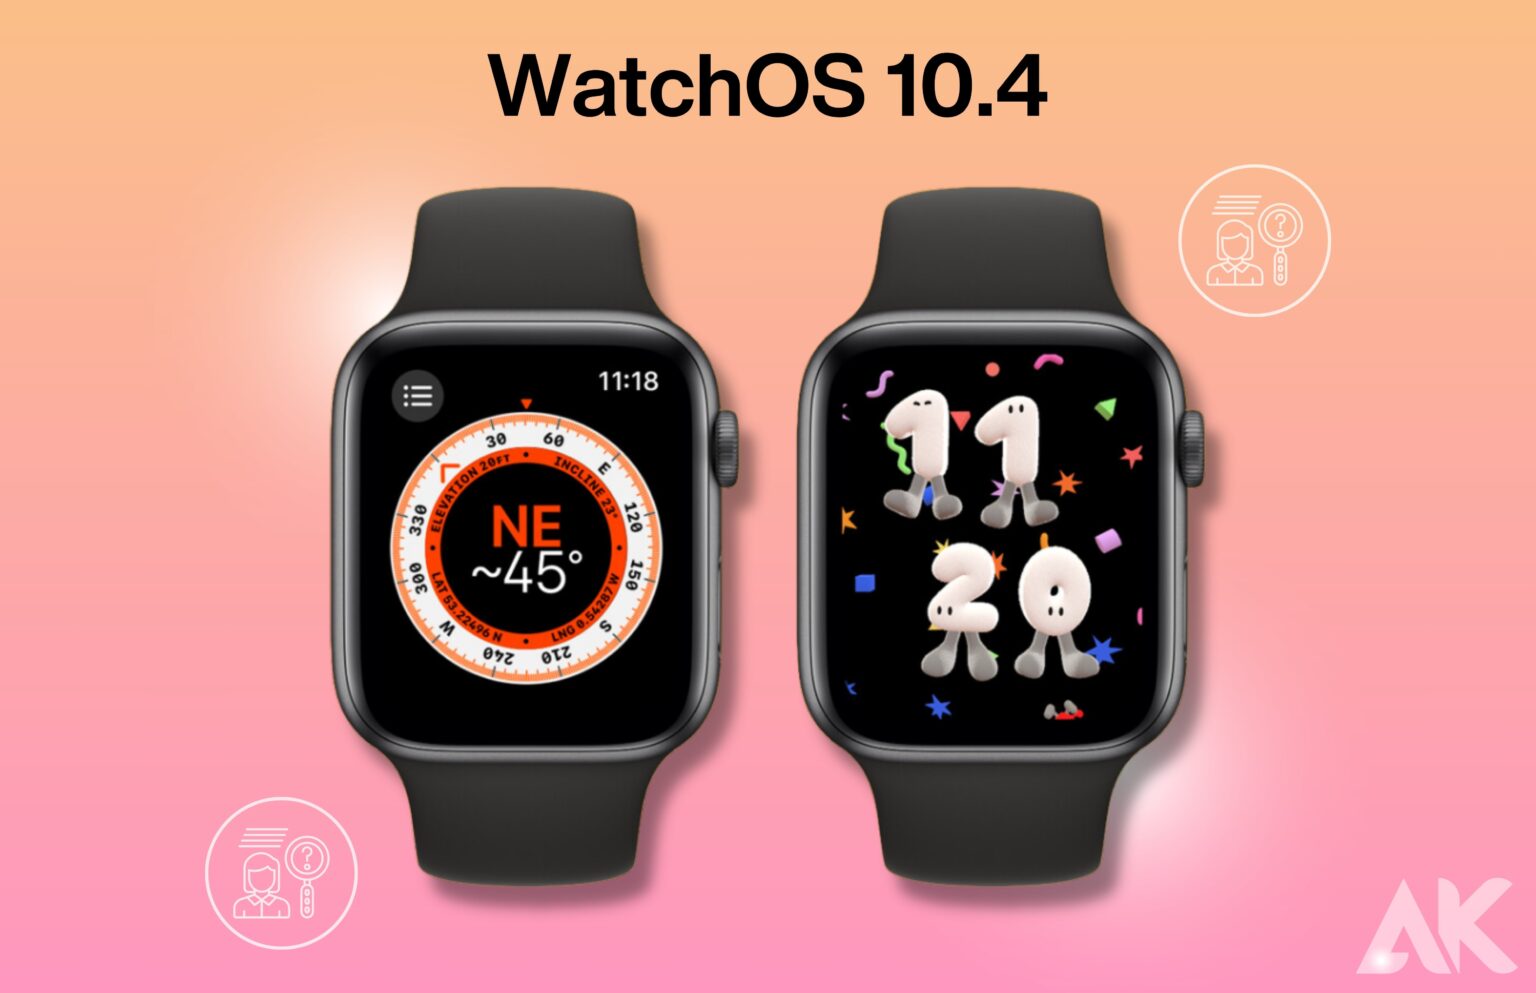 Level Up Your Style New Watch Faces Introduced in watchOS 10.4